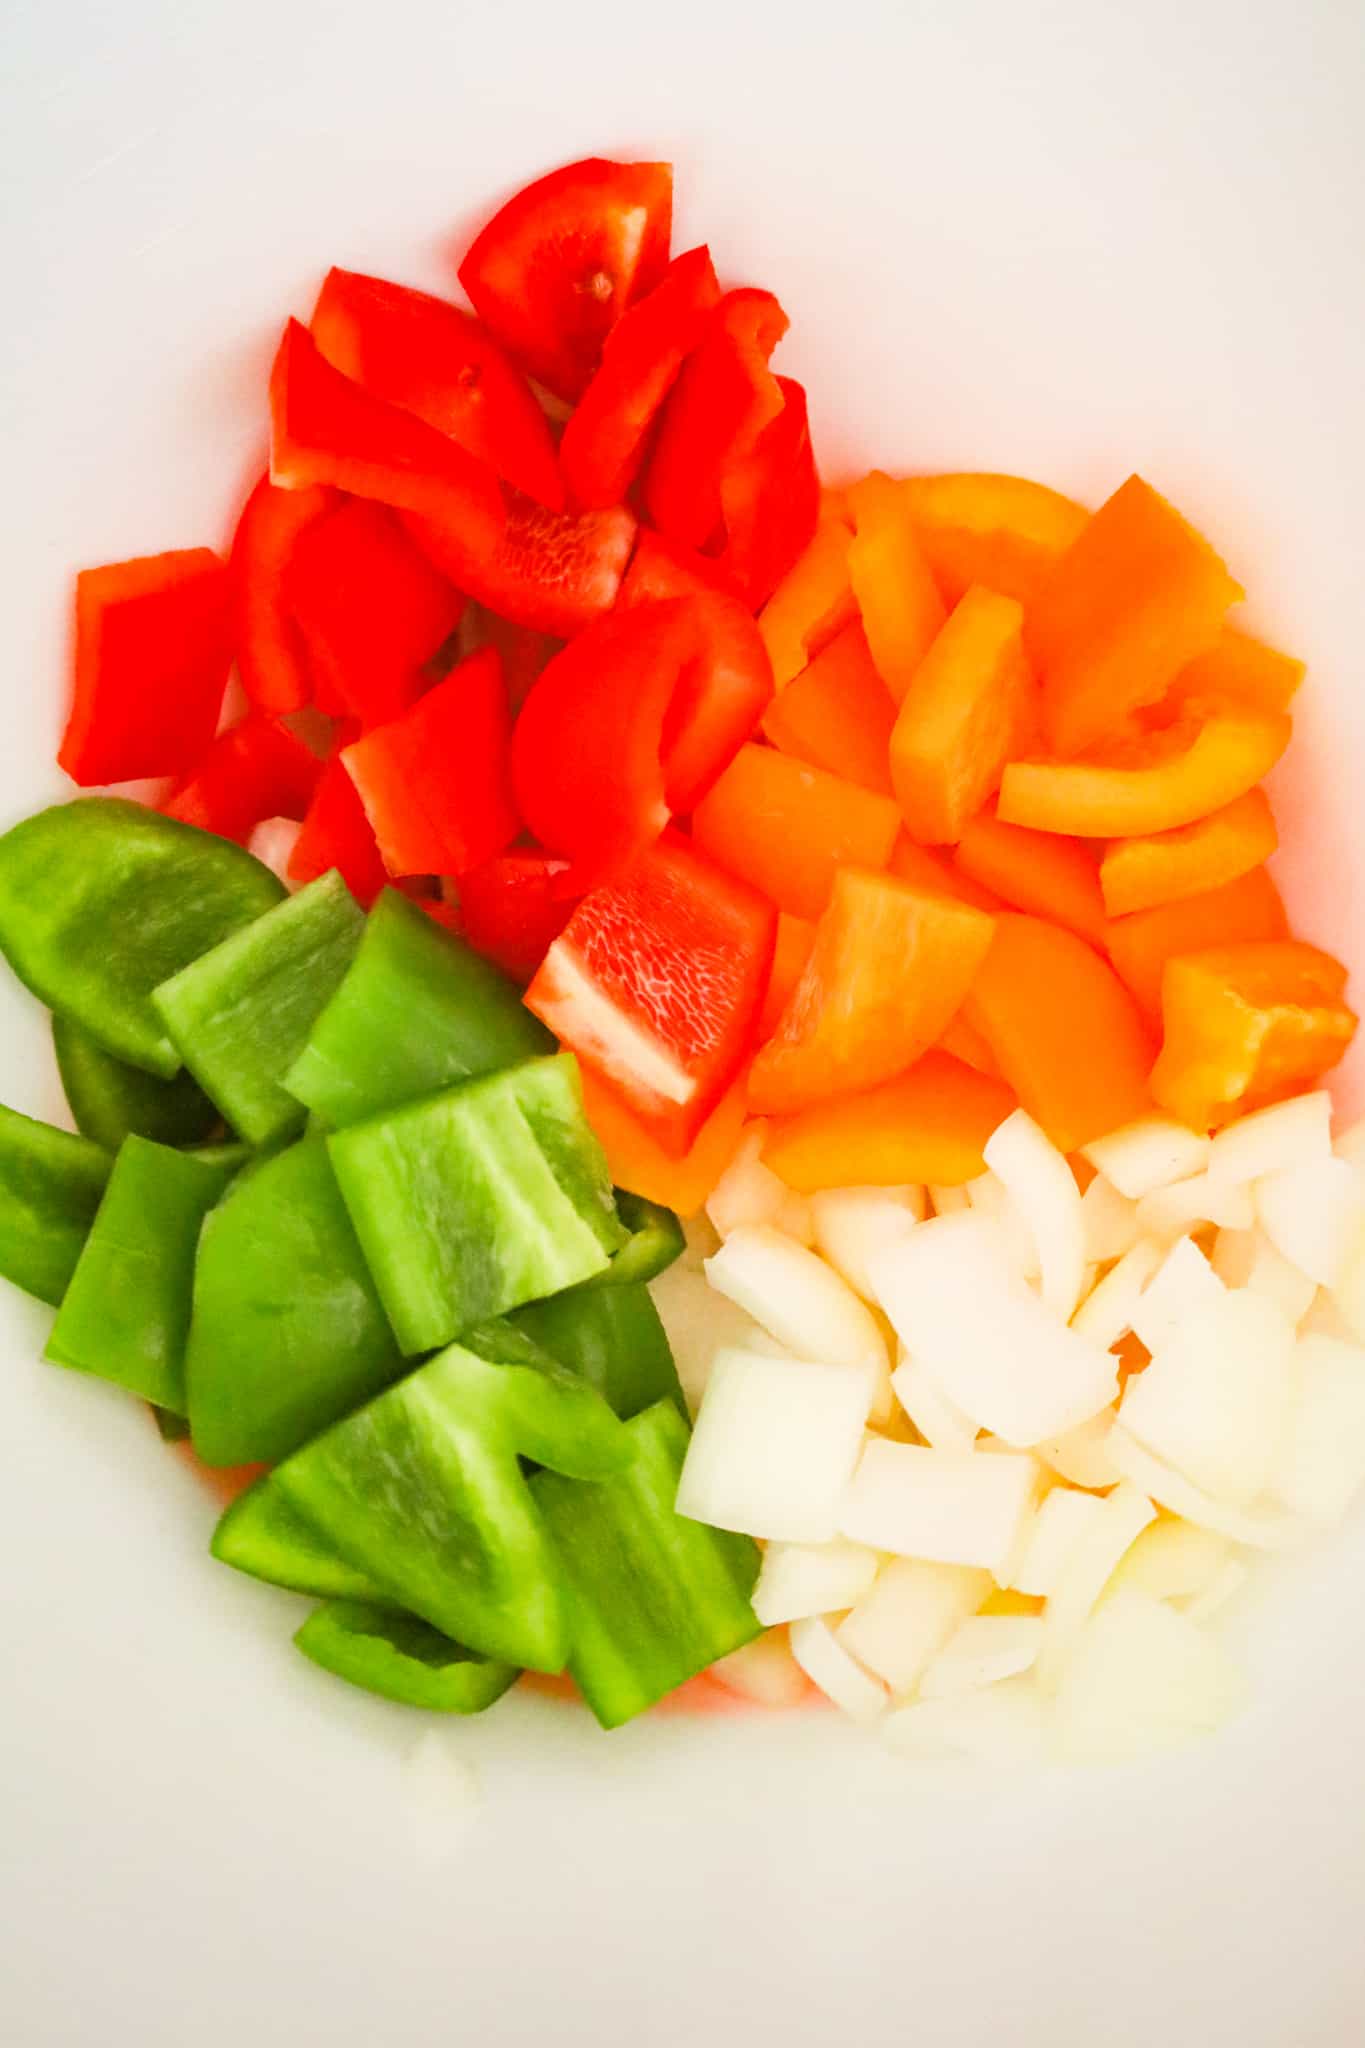 diced onions and peppers in a mixing bowl